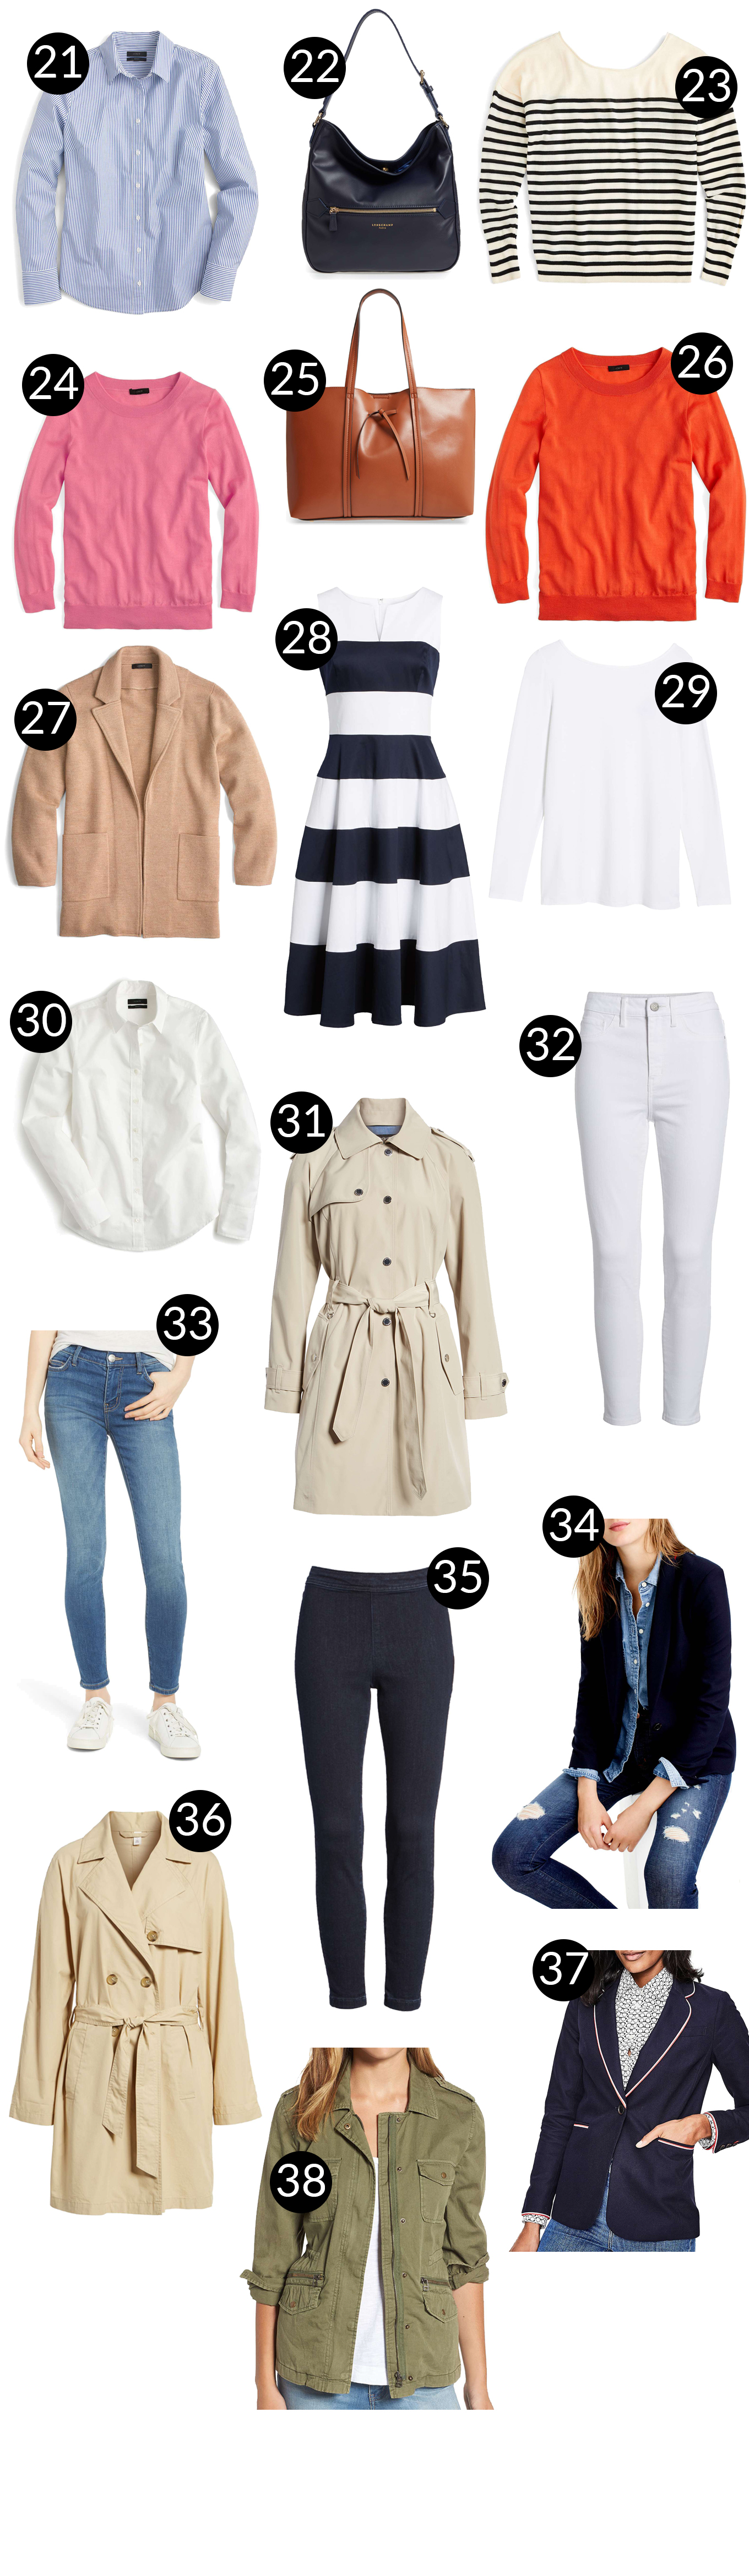 The Ultimate Guide to the Nordstrom Sale: What to Buy